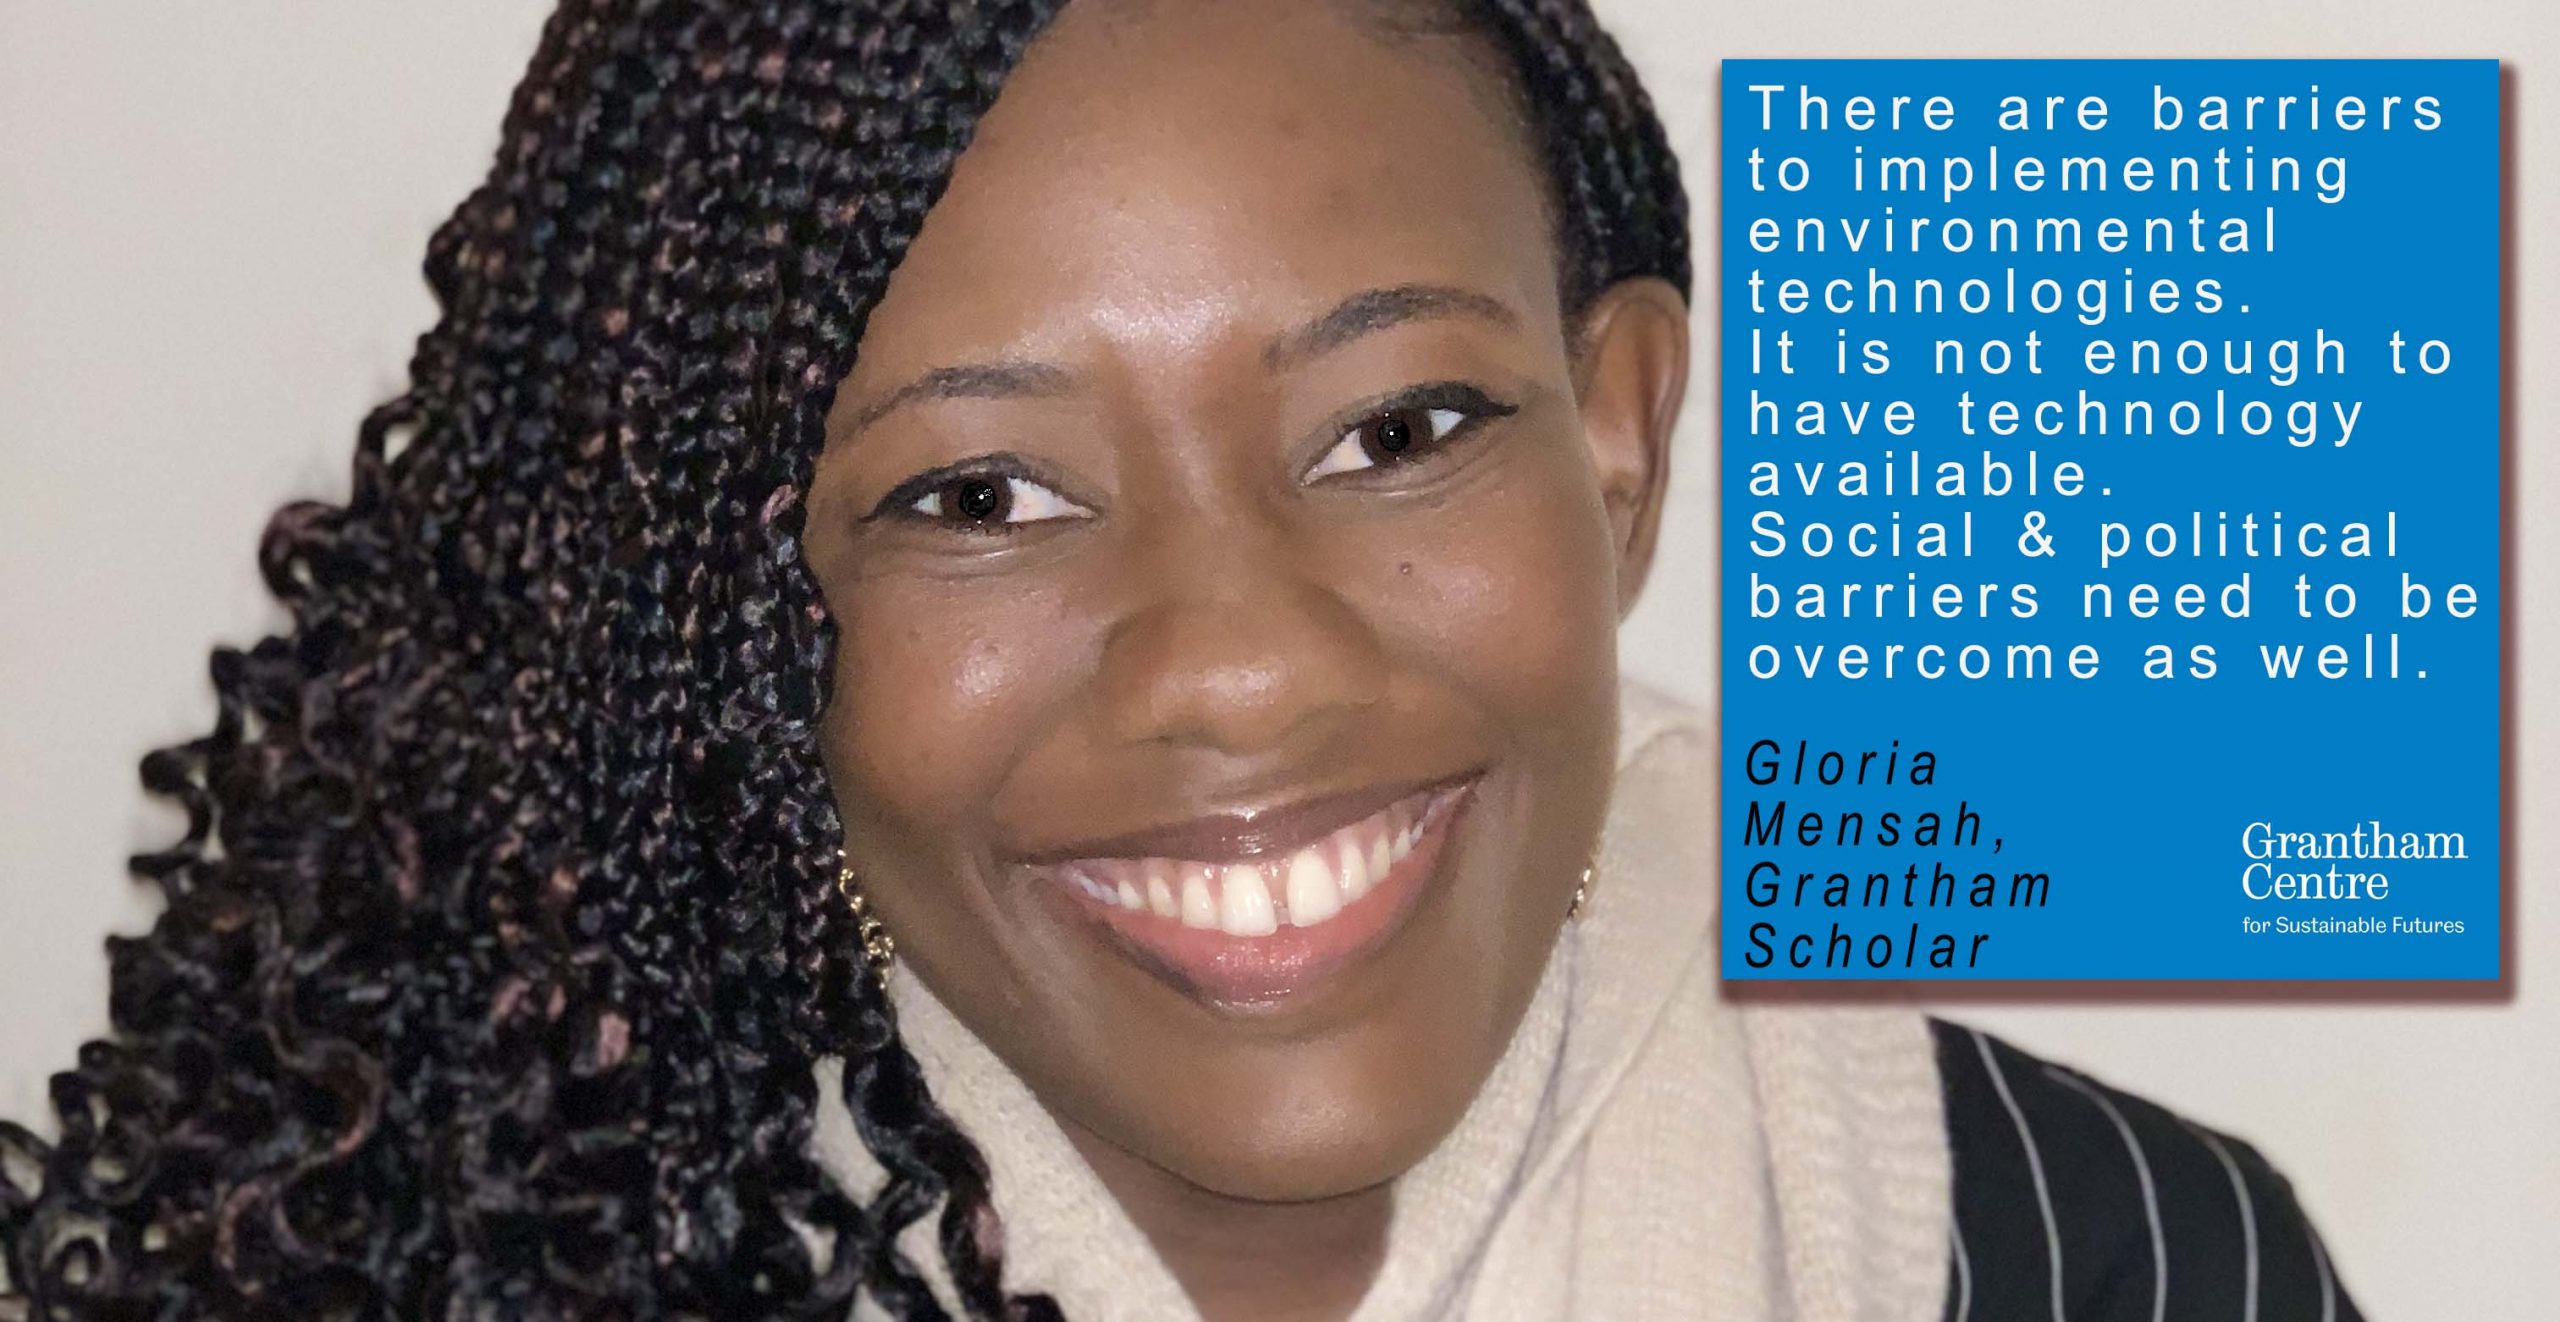 Gloria Mensah who says scientists should think like policy makers